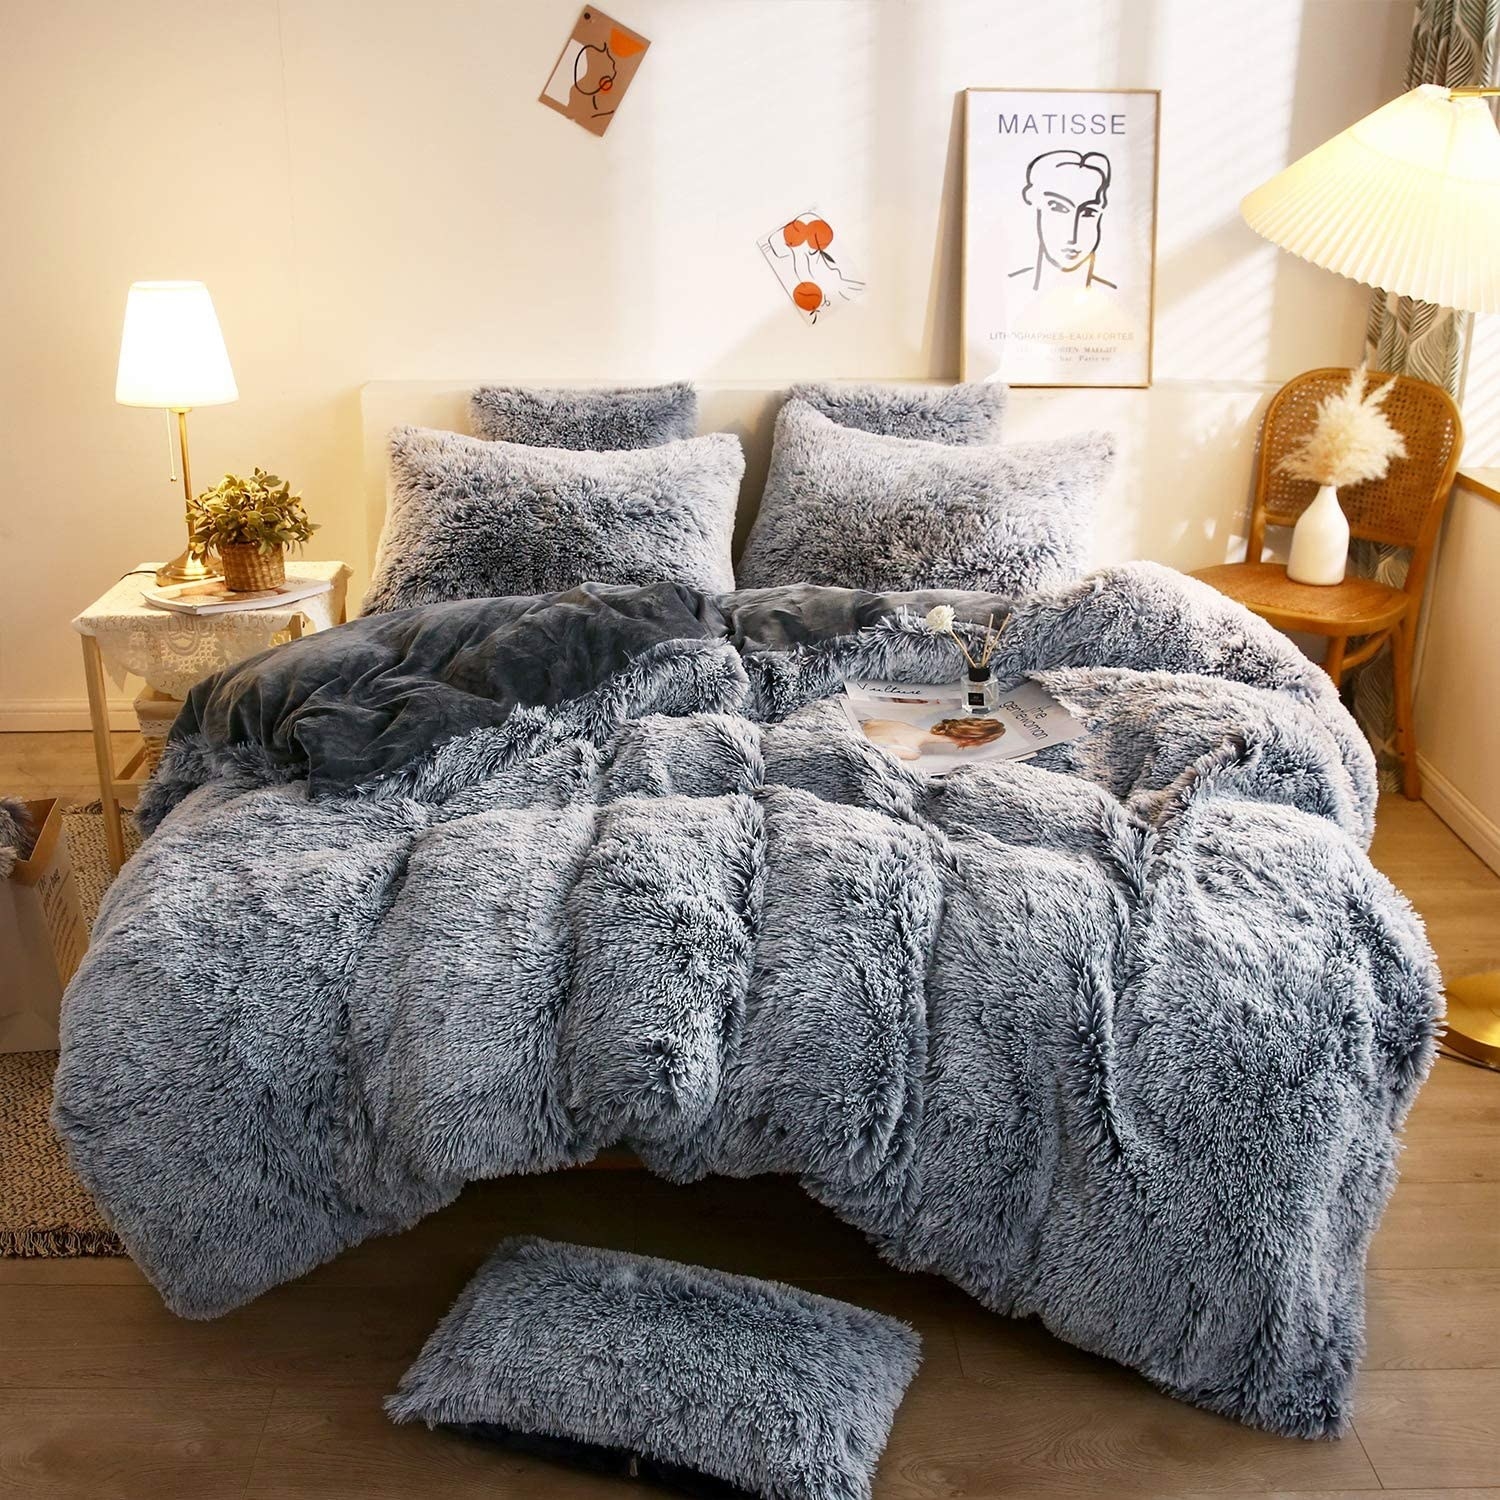 a fluffy bed set made of plush shag material in a scandinavian style bedroom